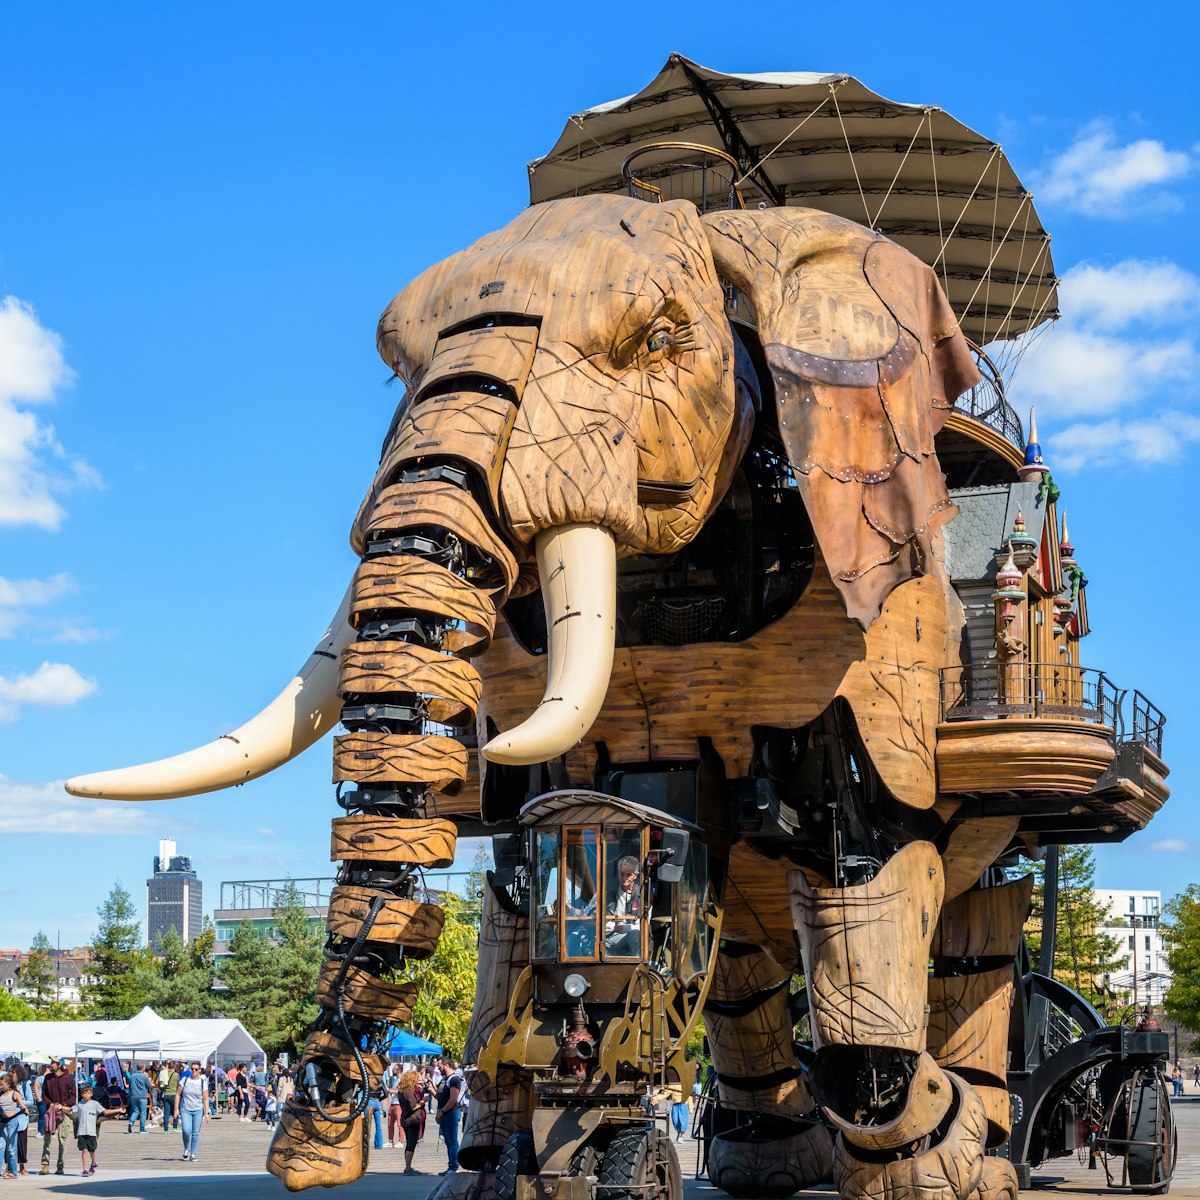 Nantes, France - September 17, 2022: The Great Elephant animated giant puppet, part of the Machines of the Isle of Nantes artistic and tourist attraction, wanders slowly amid onlookers on a sunny day.; Shutterstock ID 2220543875; your: Sloane Tucker; gl: 65050; netsuite: Online Editorial; full: POI
2220543875